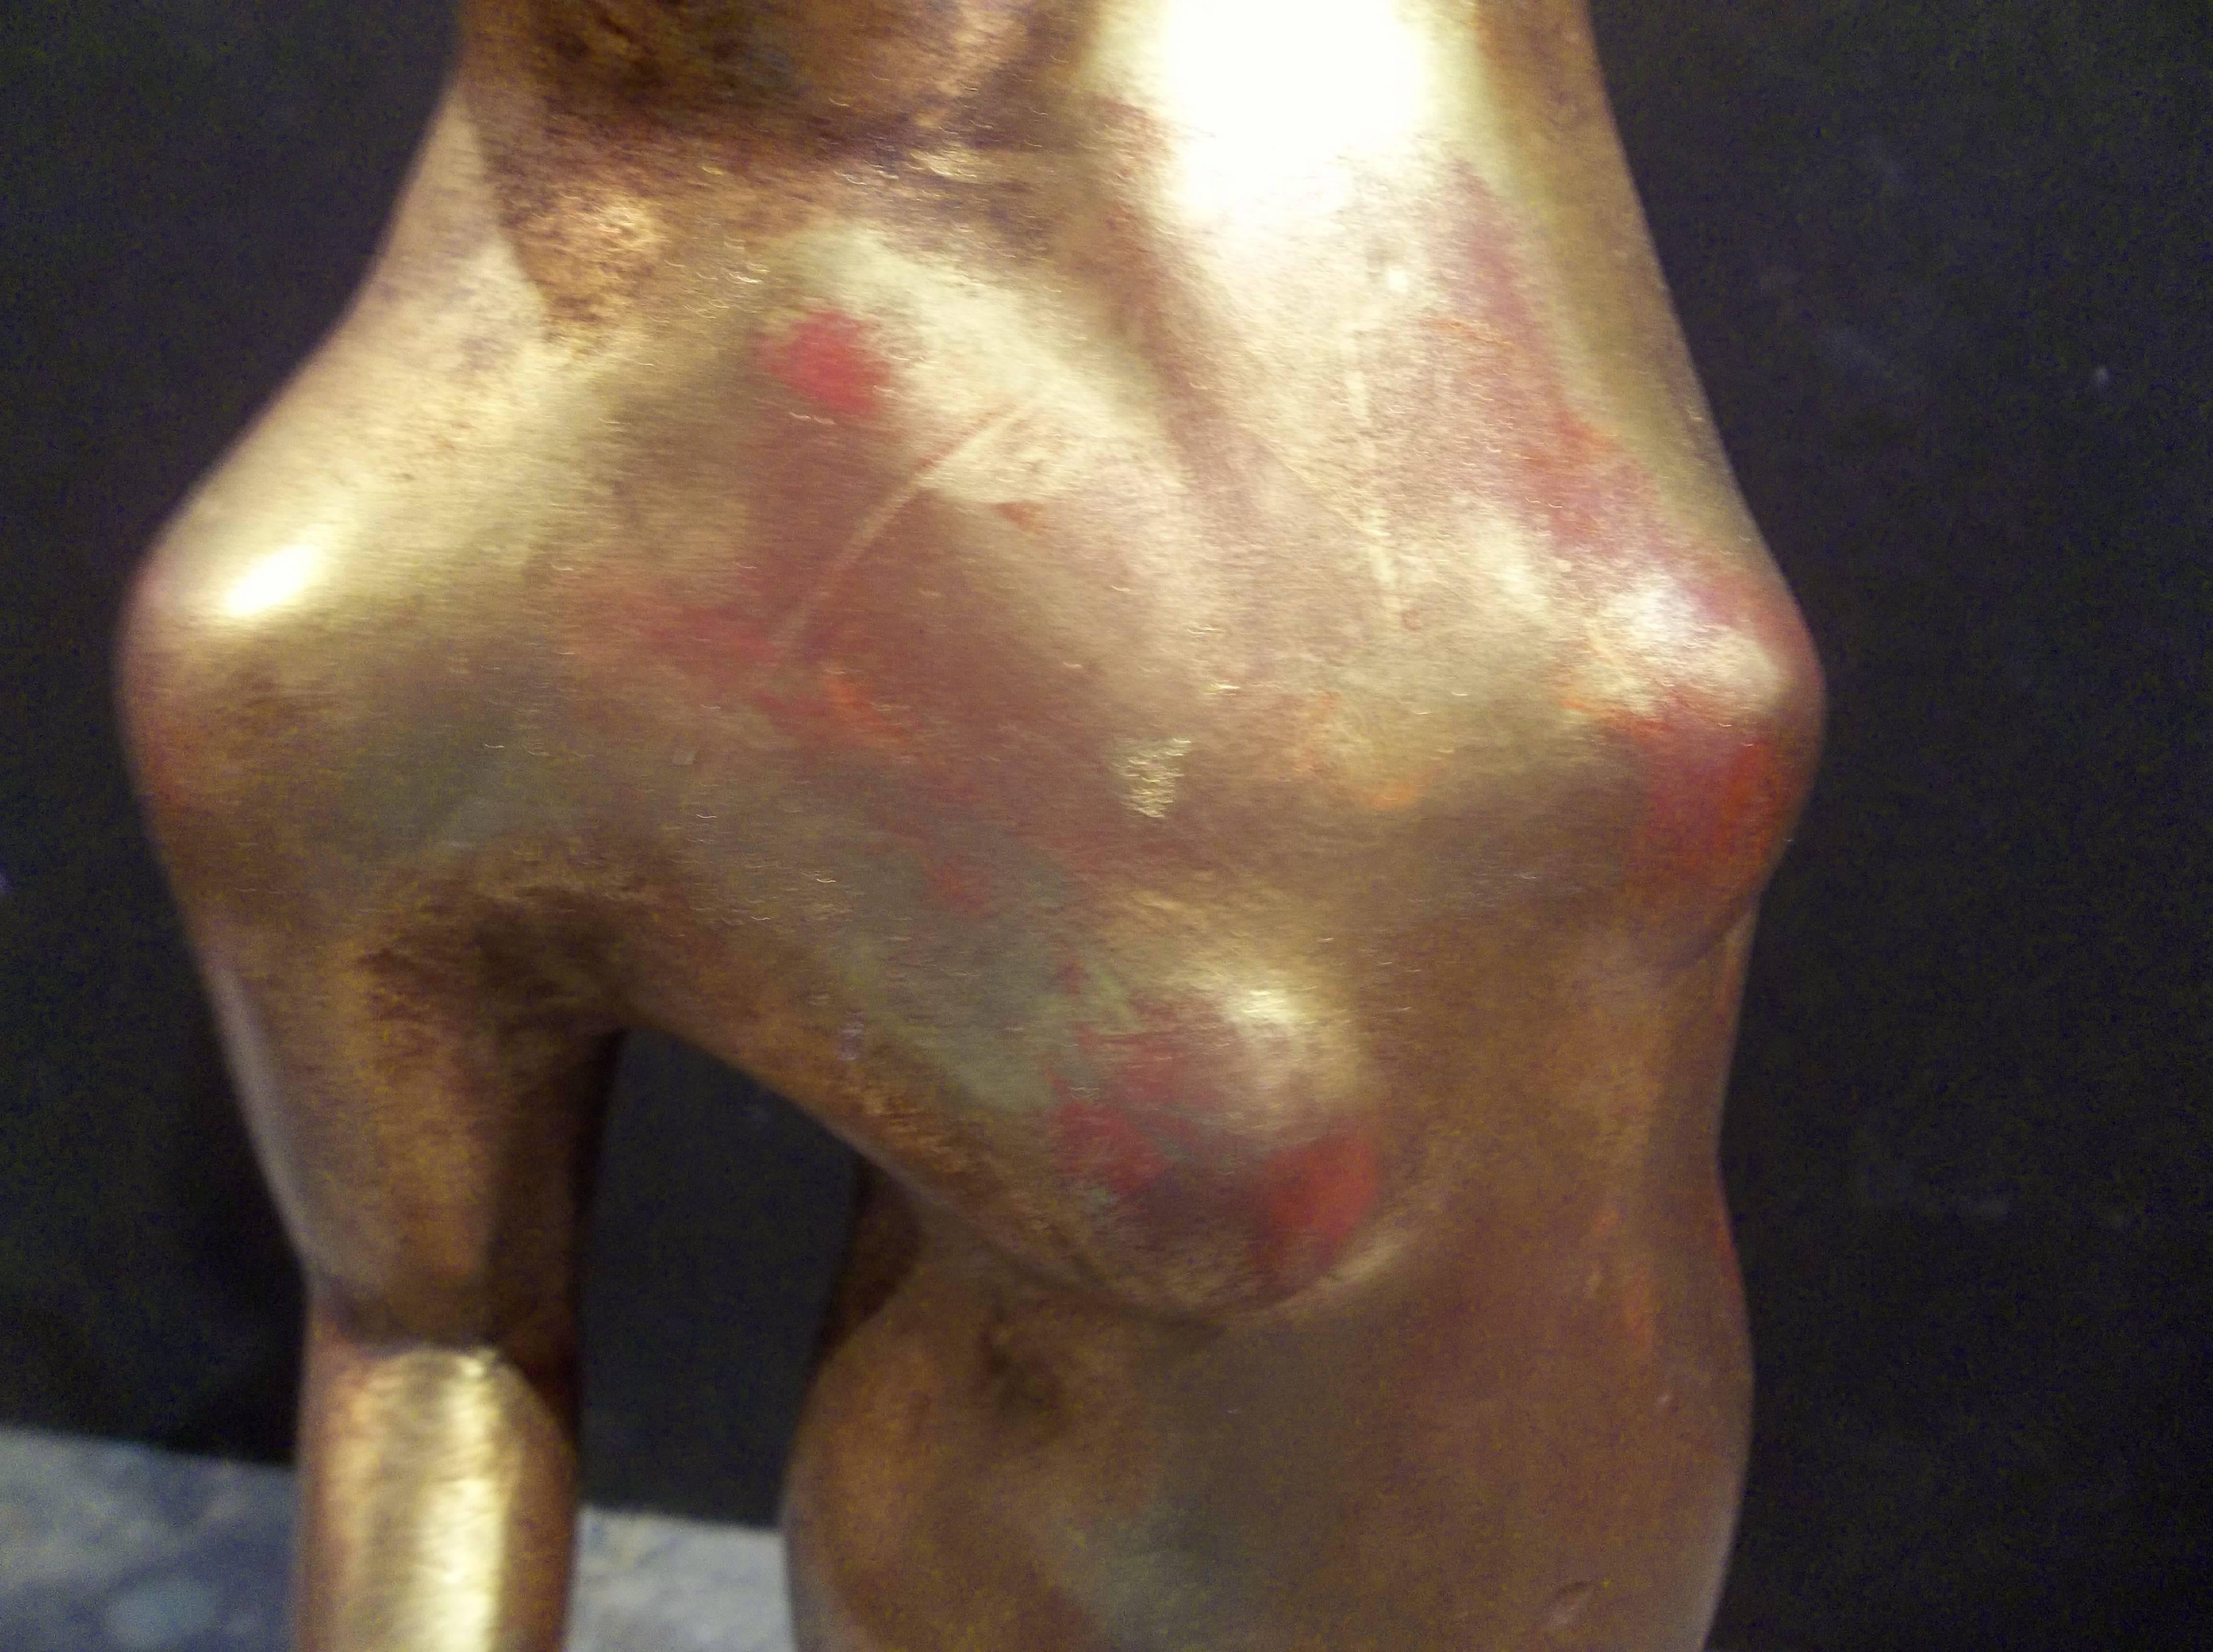 Probably French or Italian on marble base. Very stylized features suggestive of post World War II. 

Water gilt with red bole bleeding throughout. Minor wear, chipping, repair to appendix/abdomen area (more apparent in last photo). 

Sculpture